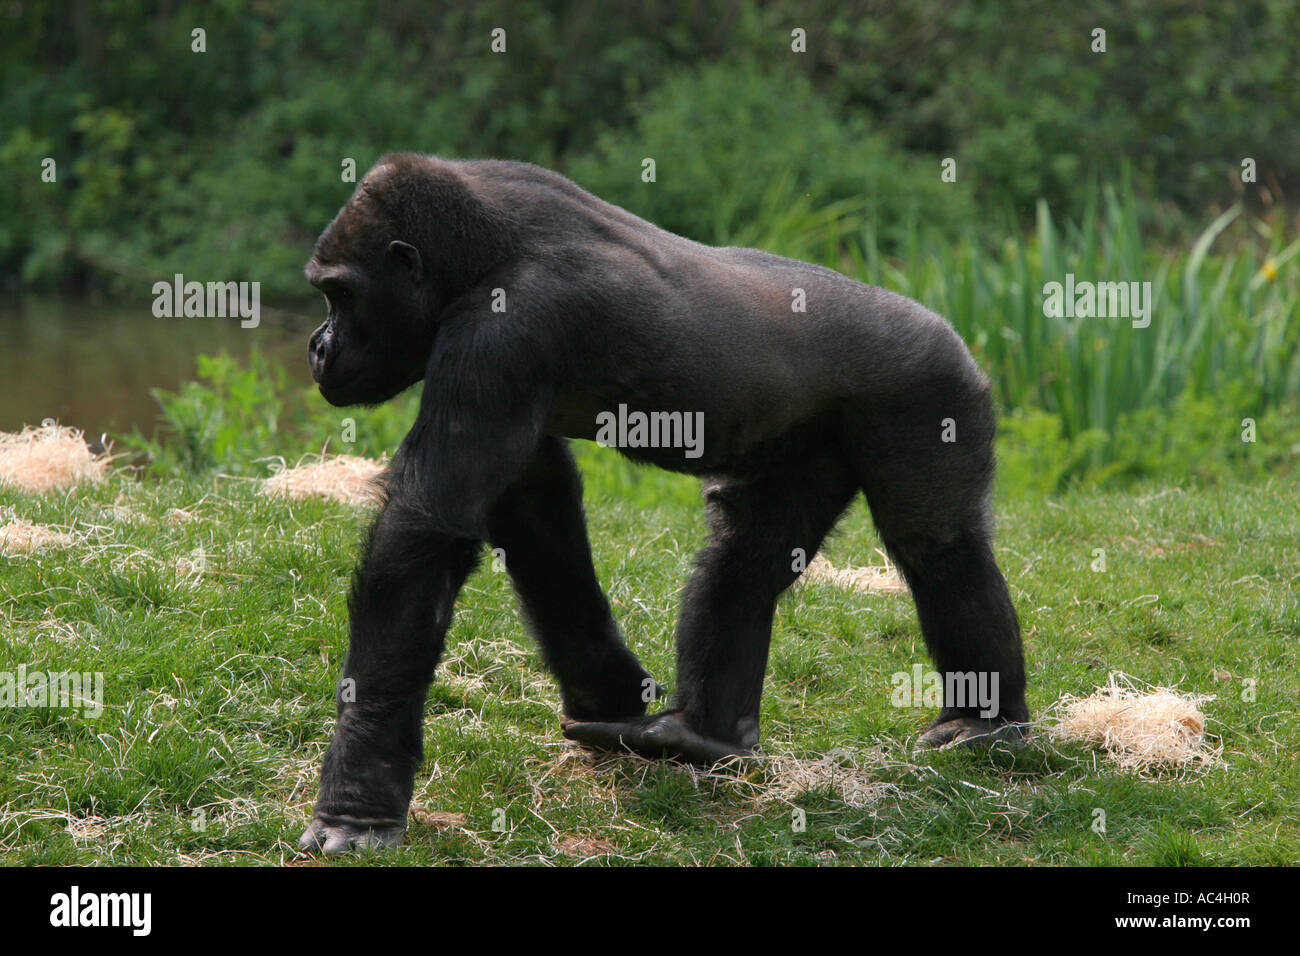 Dark coloured Western Lowland Gorilla on all fours outside its sleeping area on a nature reserve Stock Photo